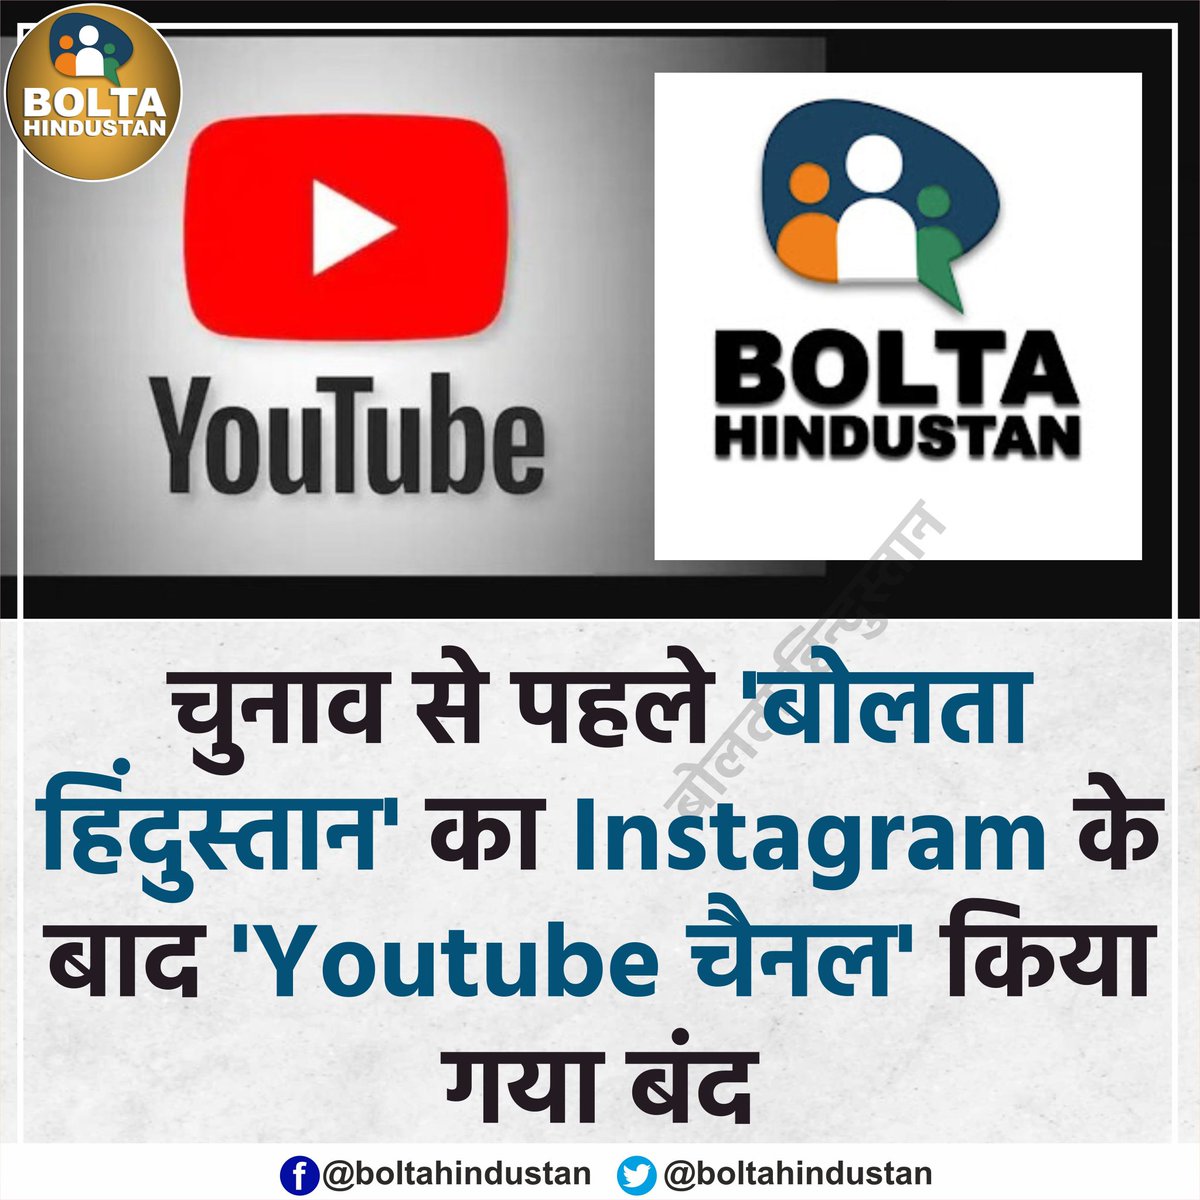 Hello @YouTubeIndia @YouTube
Everyone should have freedom of expression, banning a particular acount just because of a minor violation is not justified in a democratic country
#RestoreBoltaHindustanYT
@Azam_khan___ @mahisayss_s @humble_farha_ @acprak5h @The_iram__ @Cute_Pakiza_21